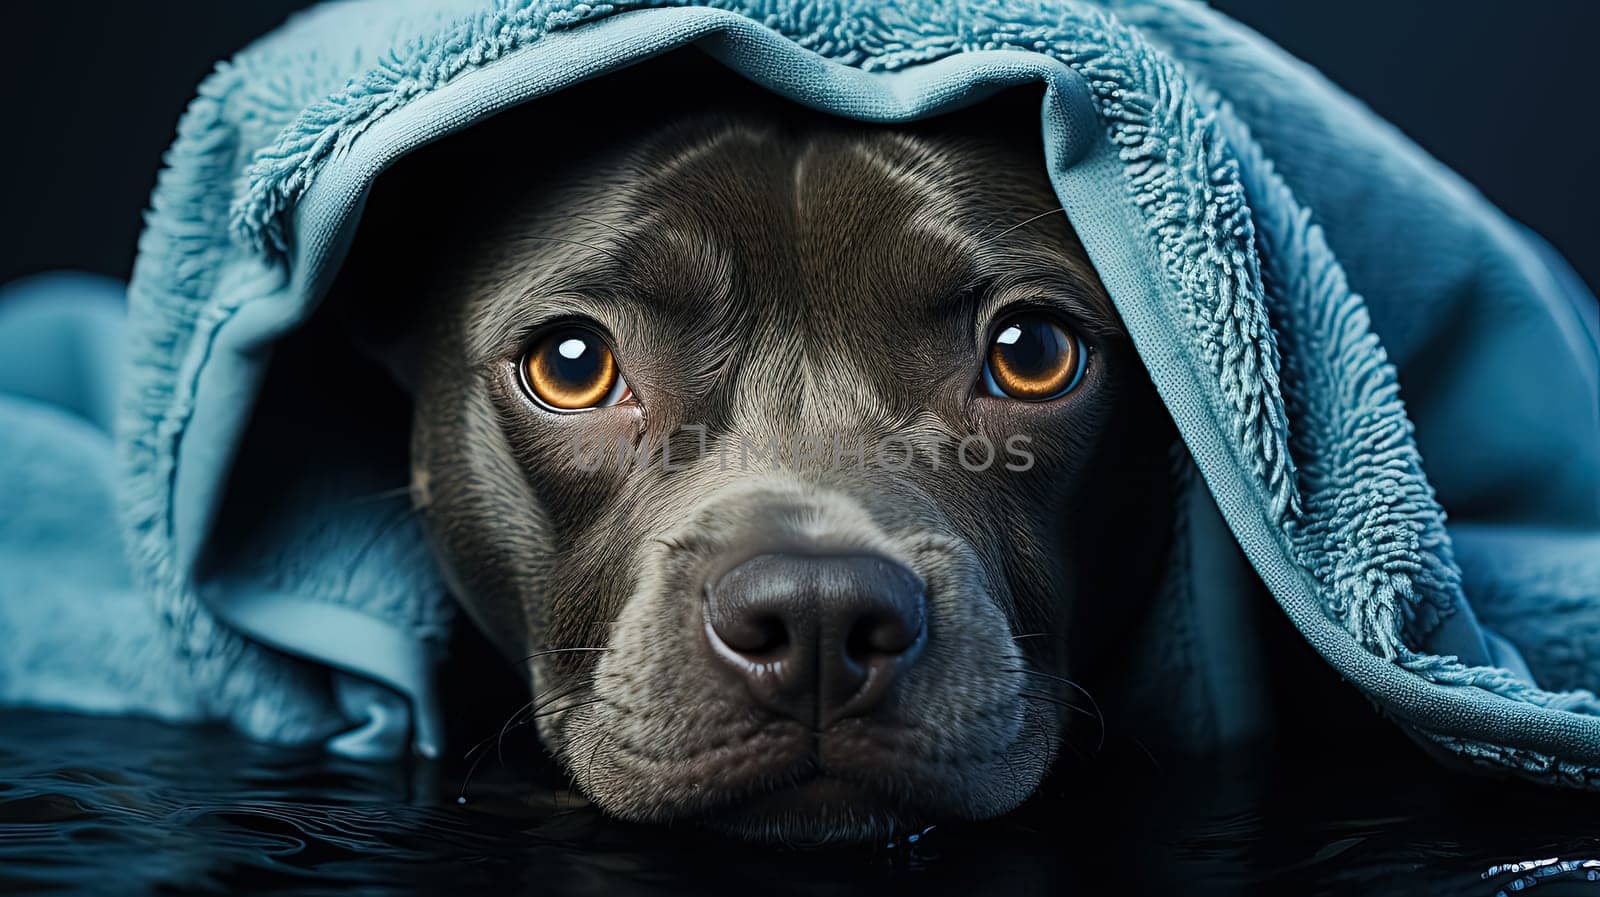 A pit bull, wrapped snugly in a towel after a bath by Alla_Morozova93